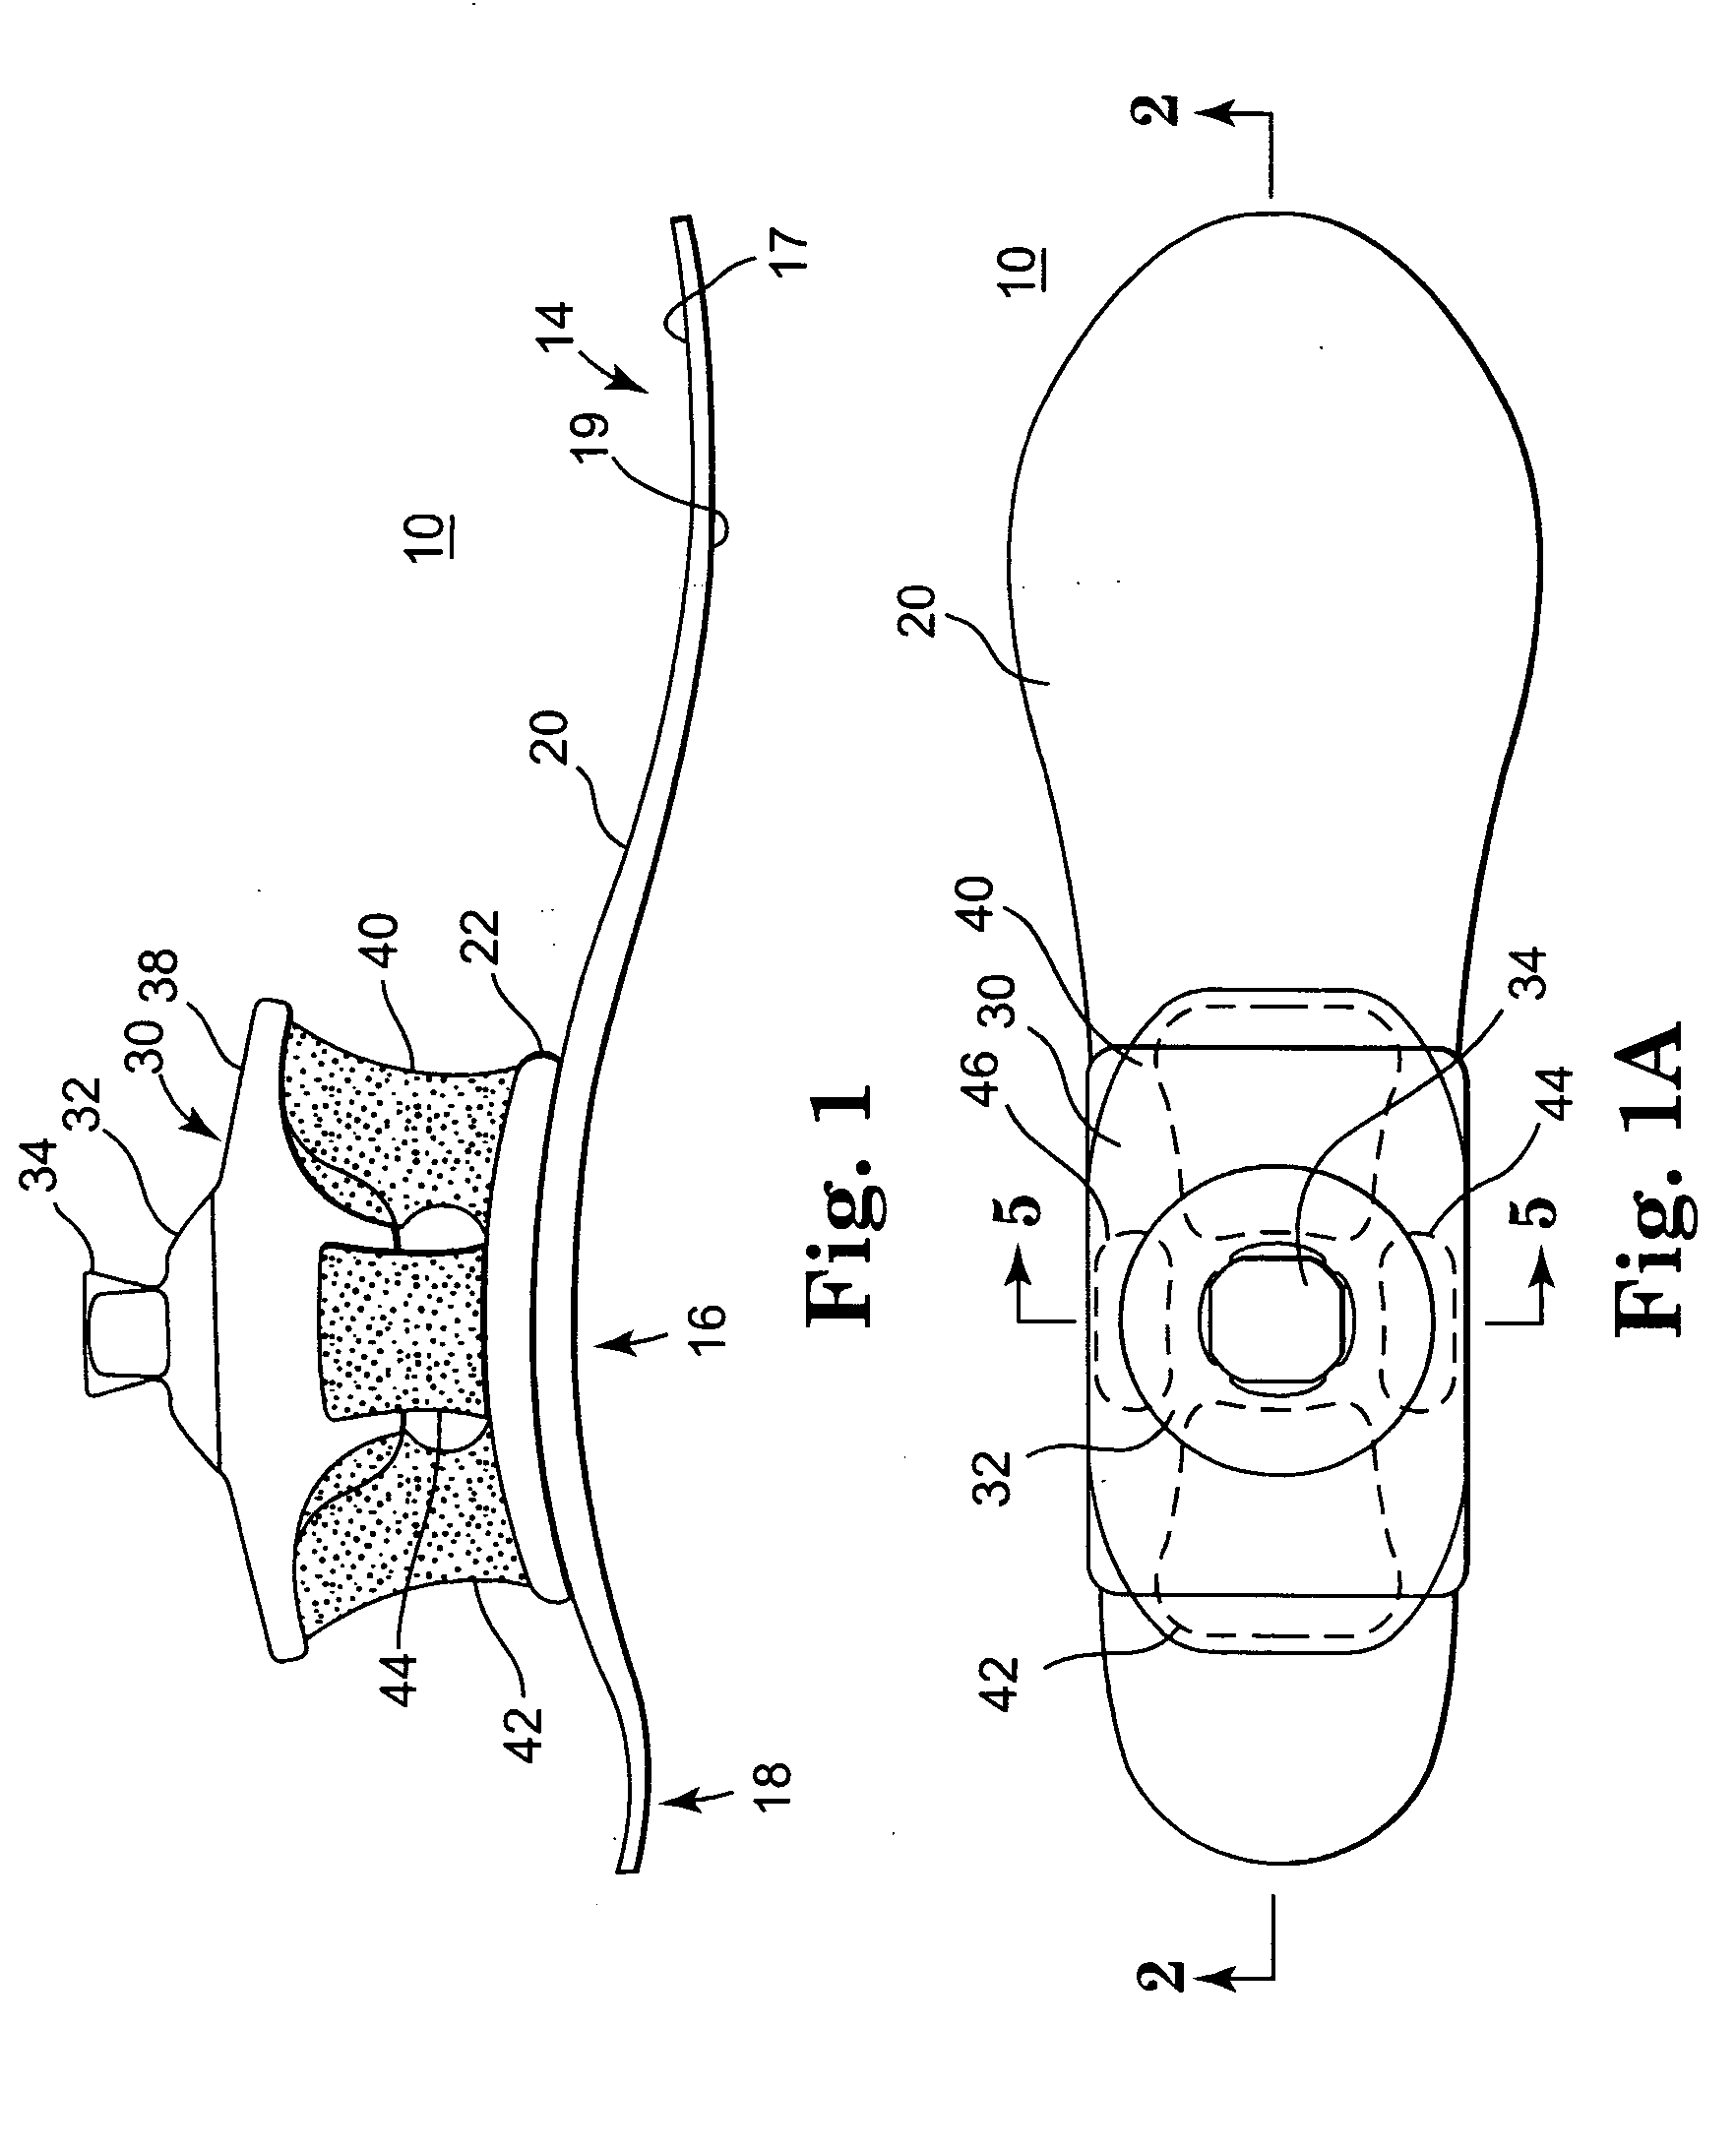 Multi-axial prosthetic foot